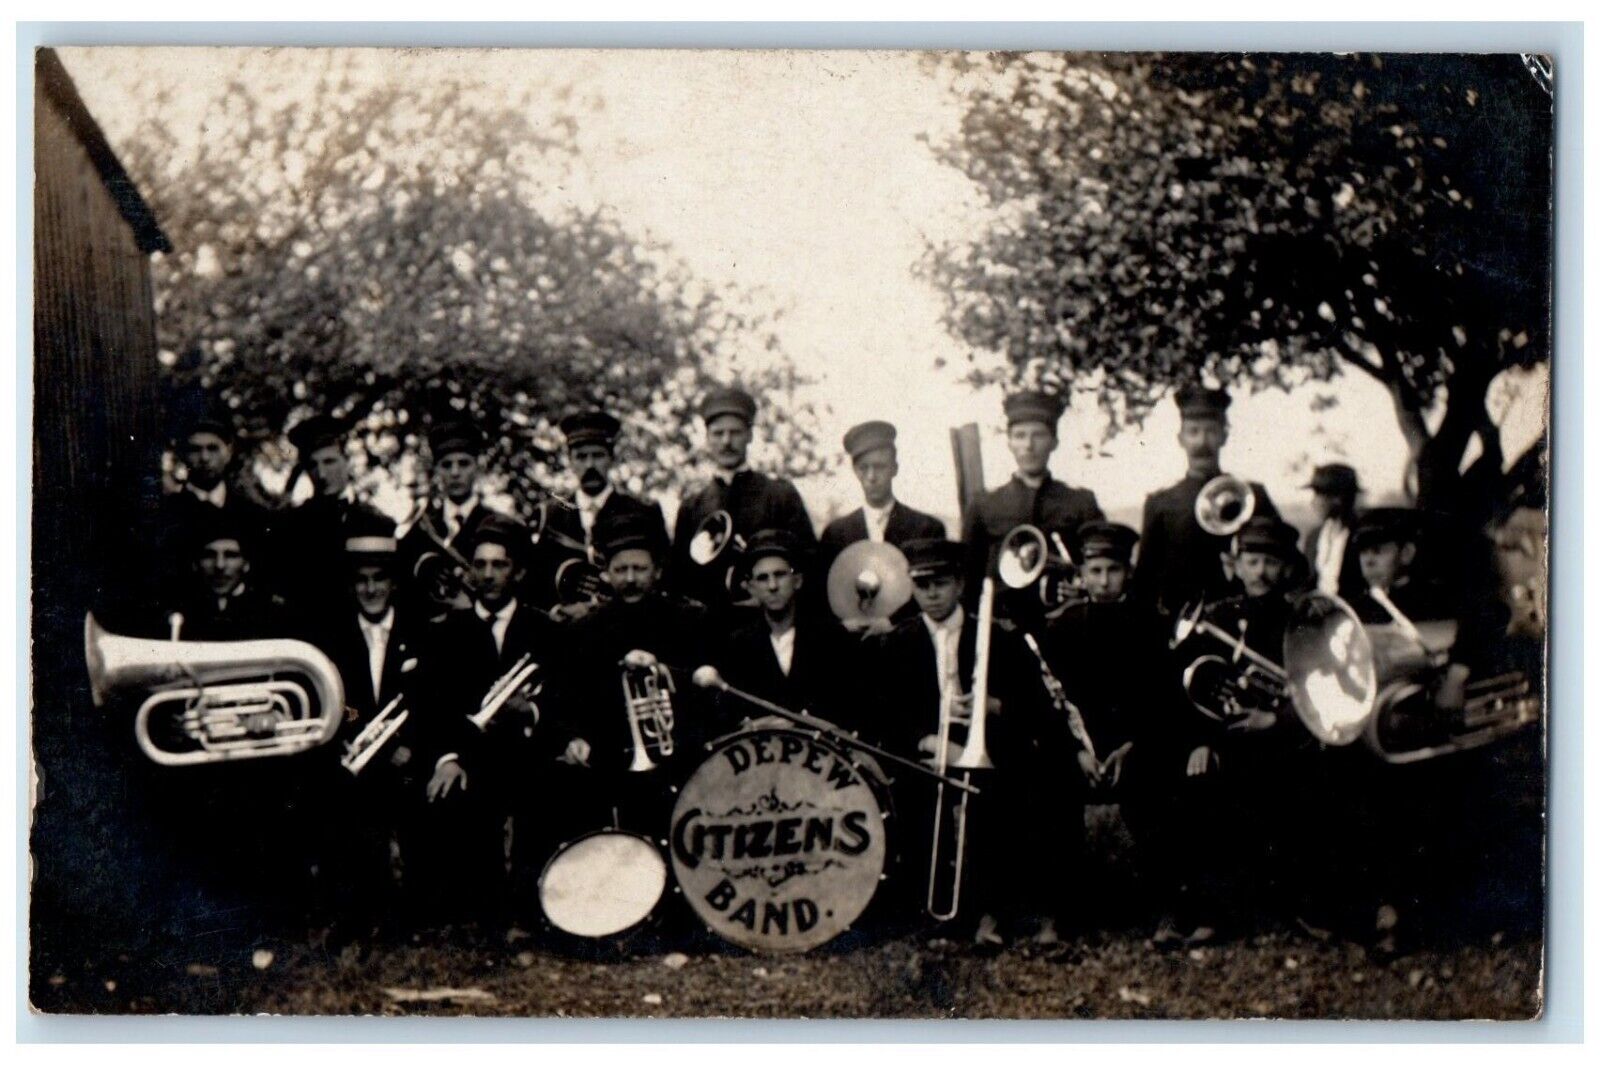 1909 Band Instrument Lancaster New York NY RPPC Photo Posted Antique Postcard